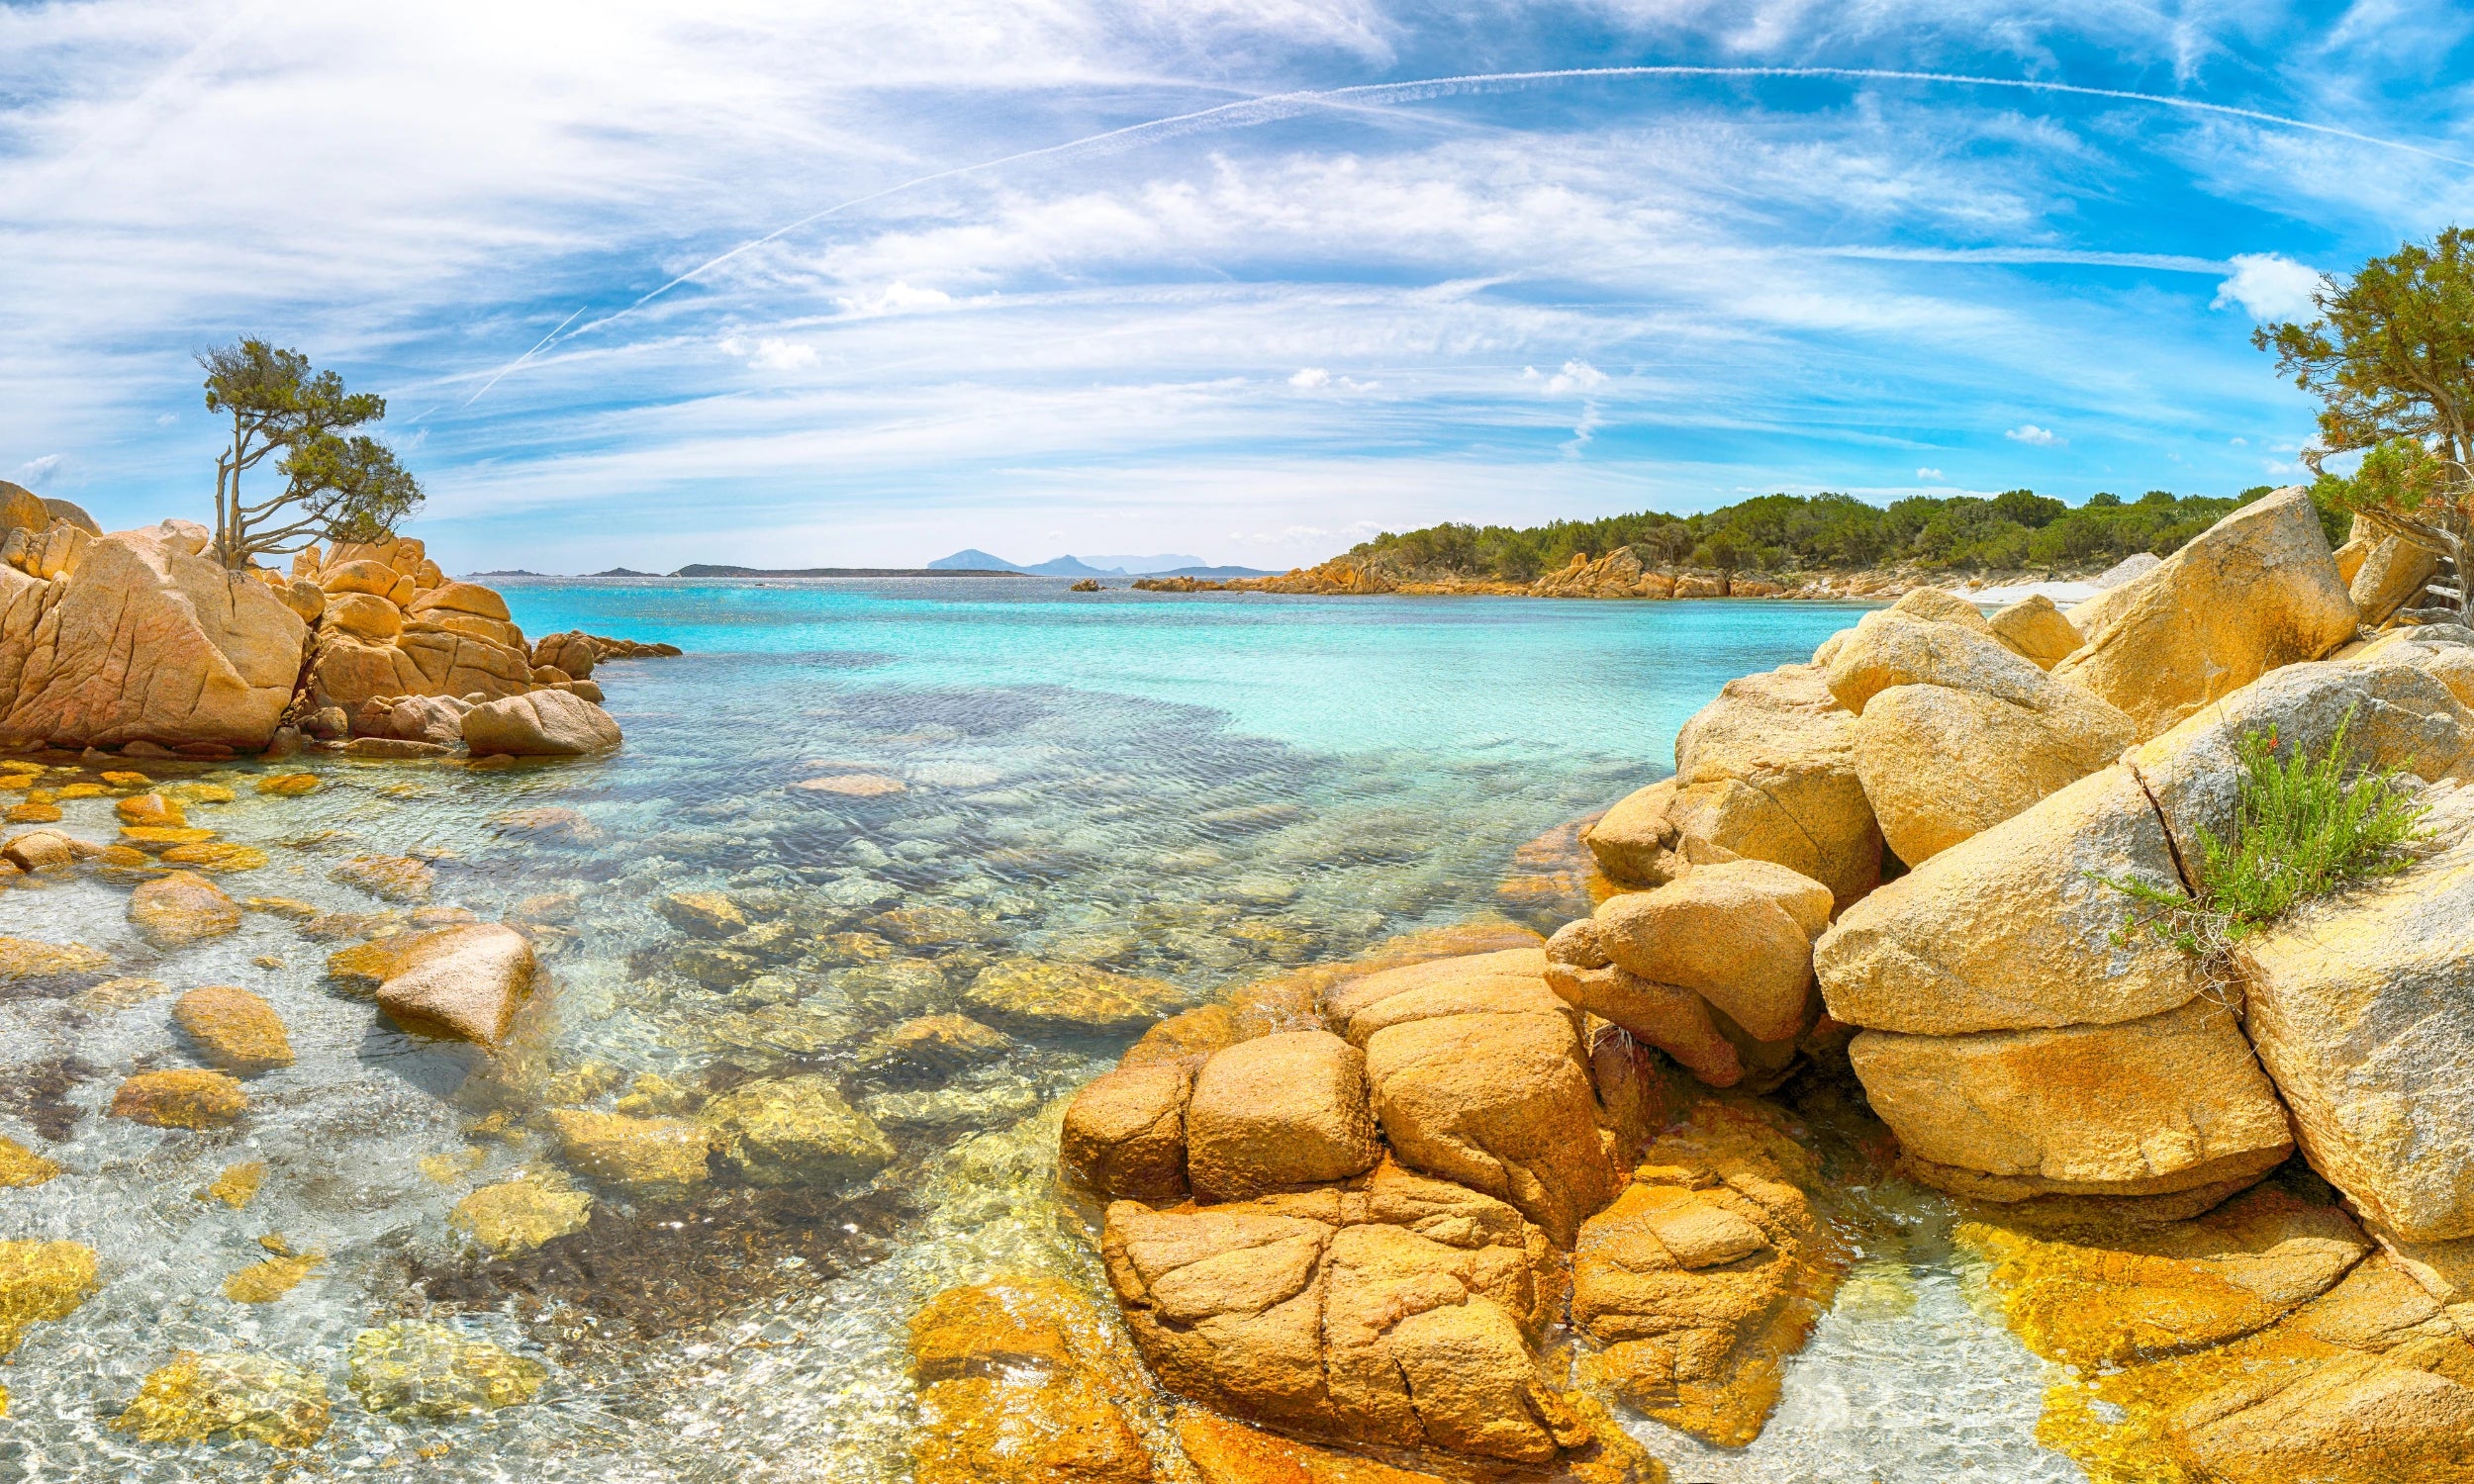 Tour of the most beautiful and unmissable beaches of the Costa Smeralda